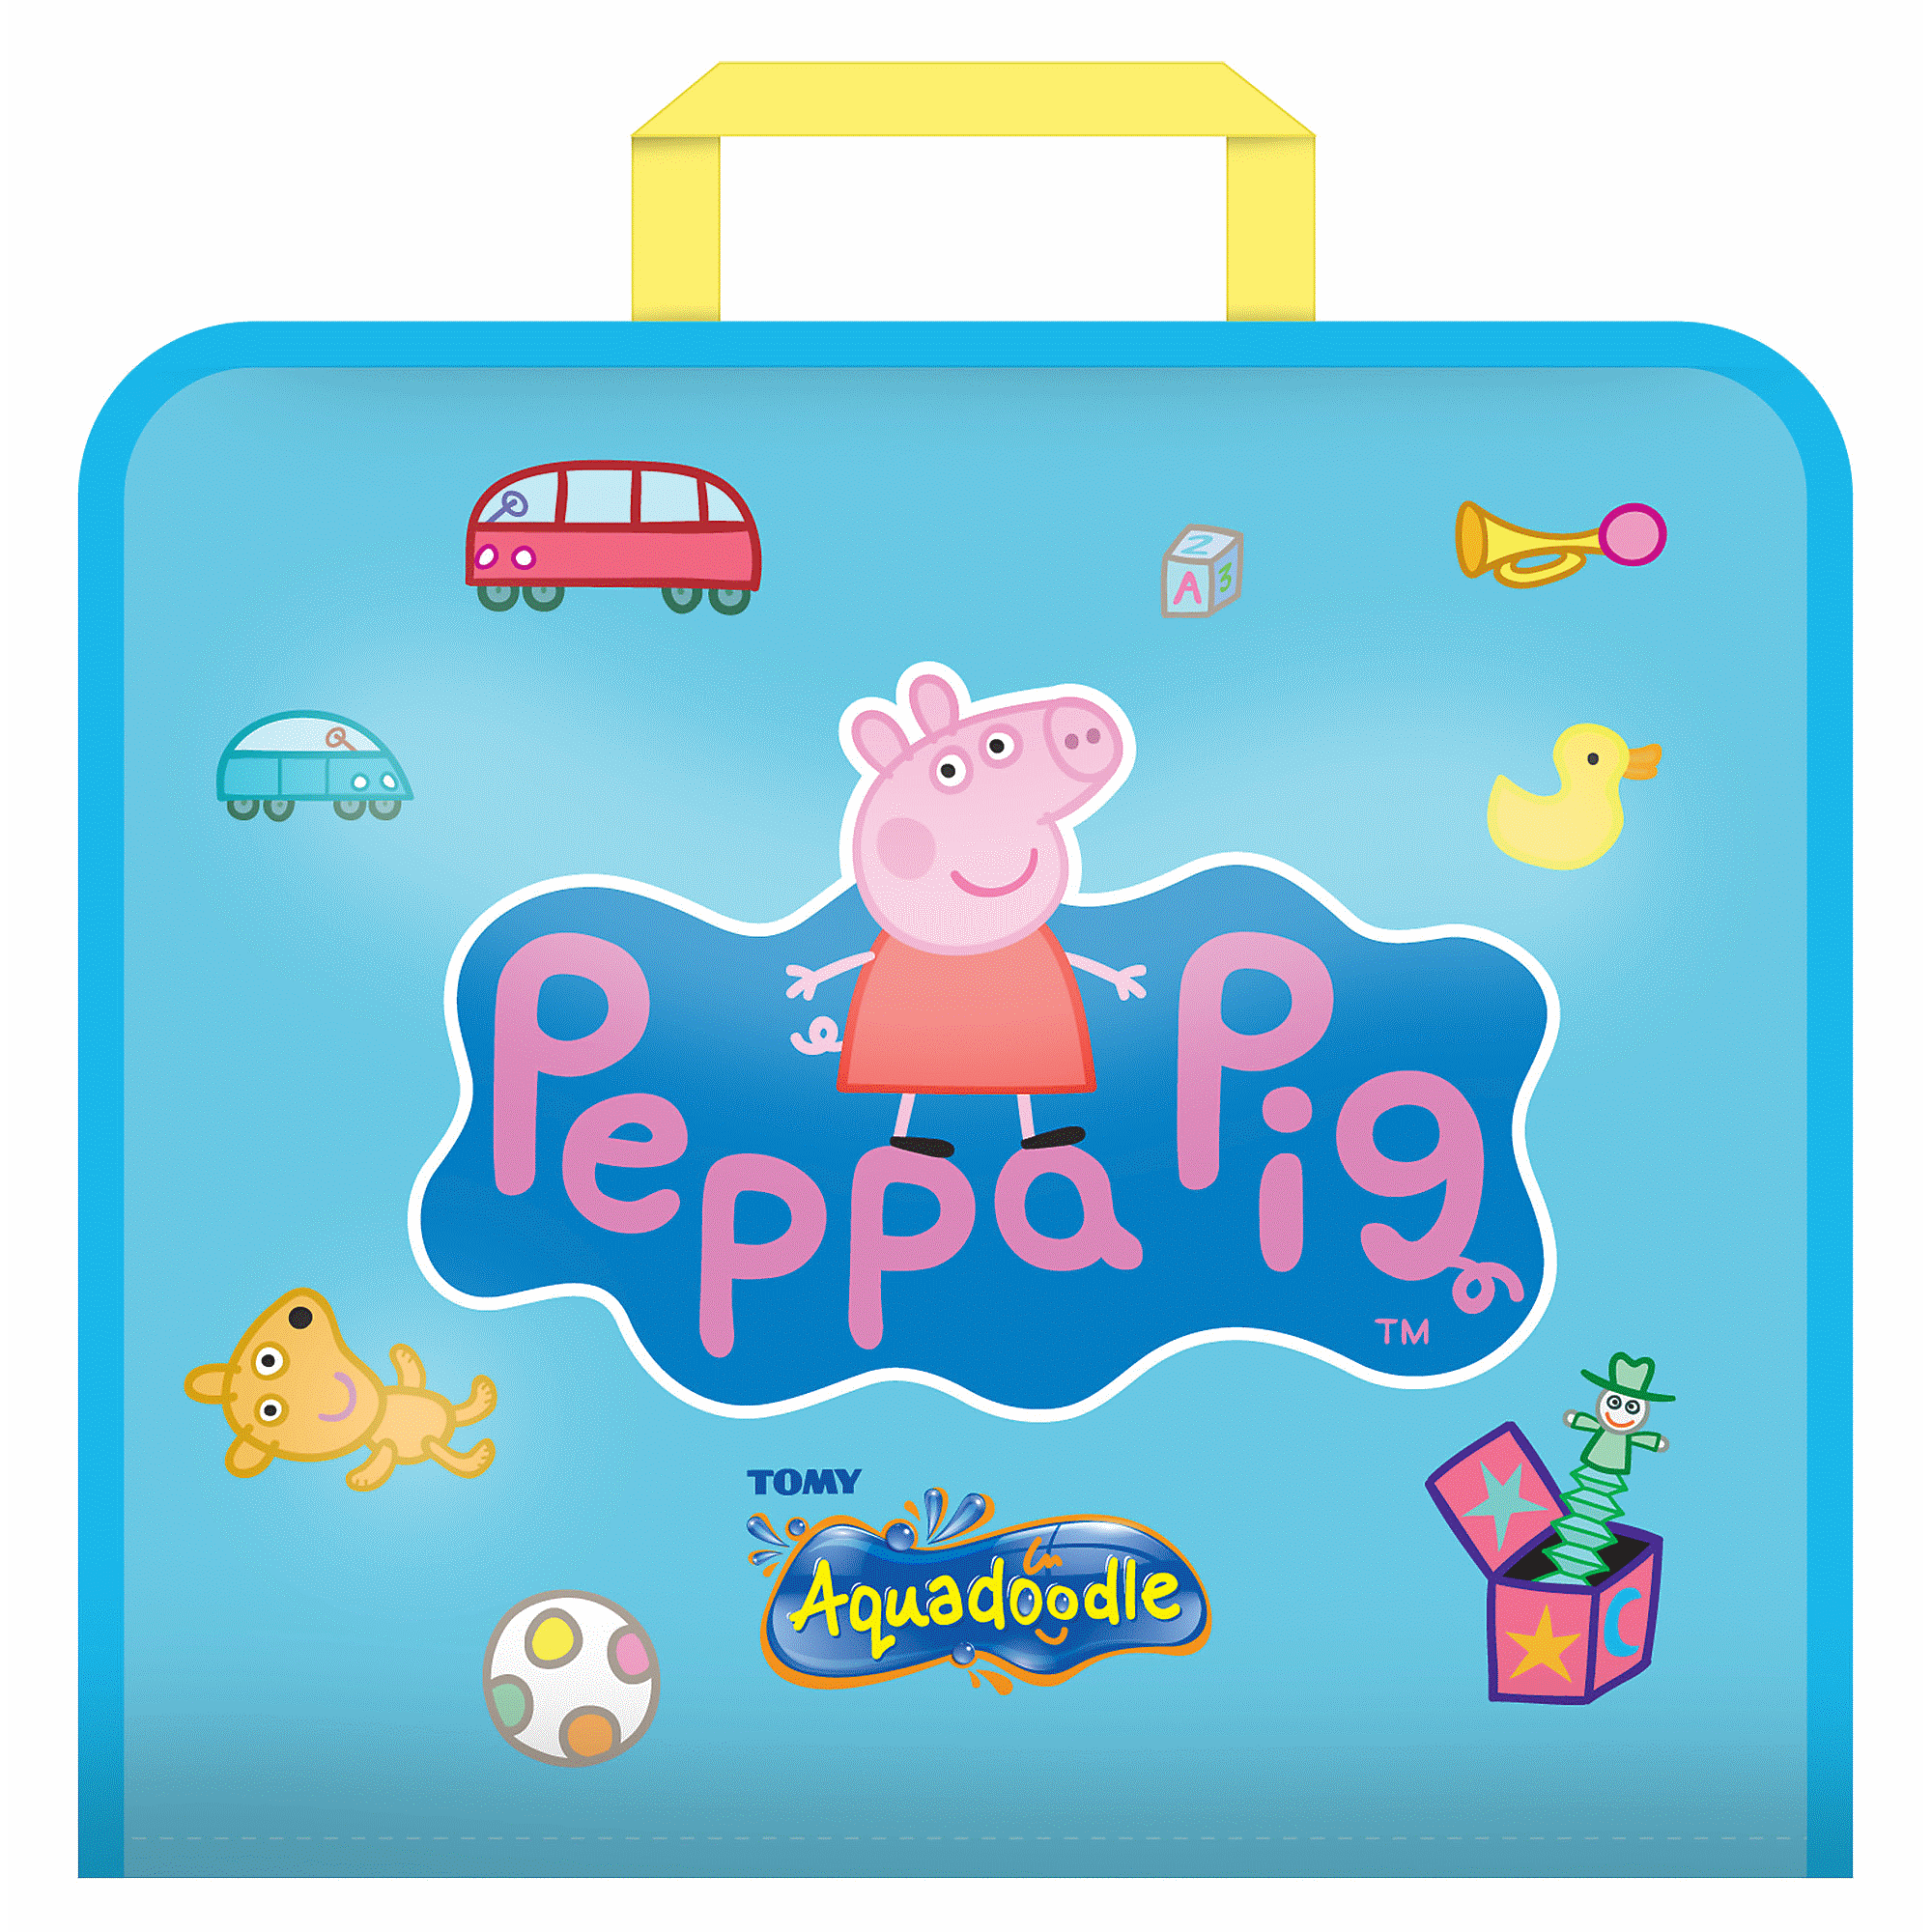 Peppa Pig Lunch Bag Set, Discounts on great Brands